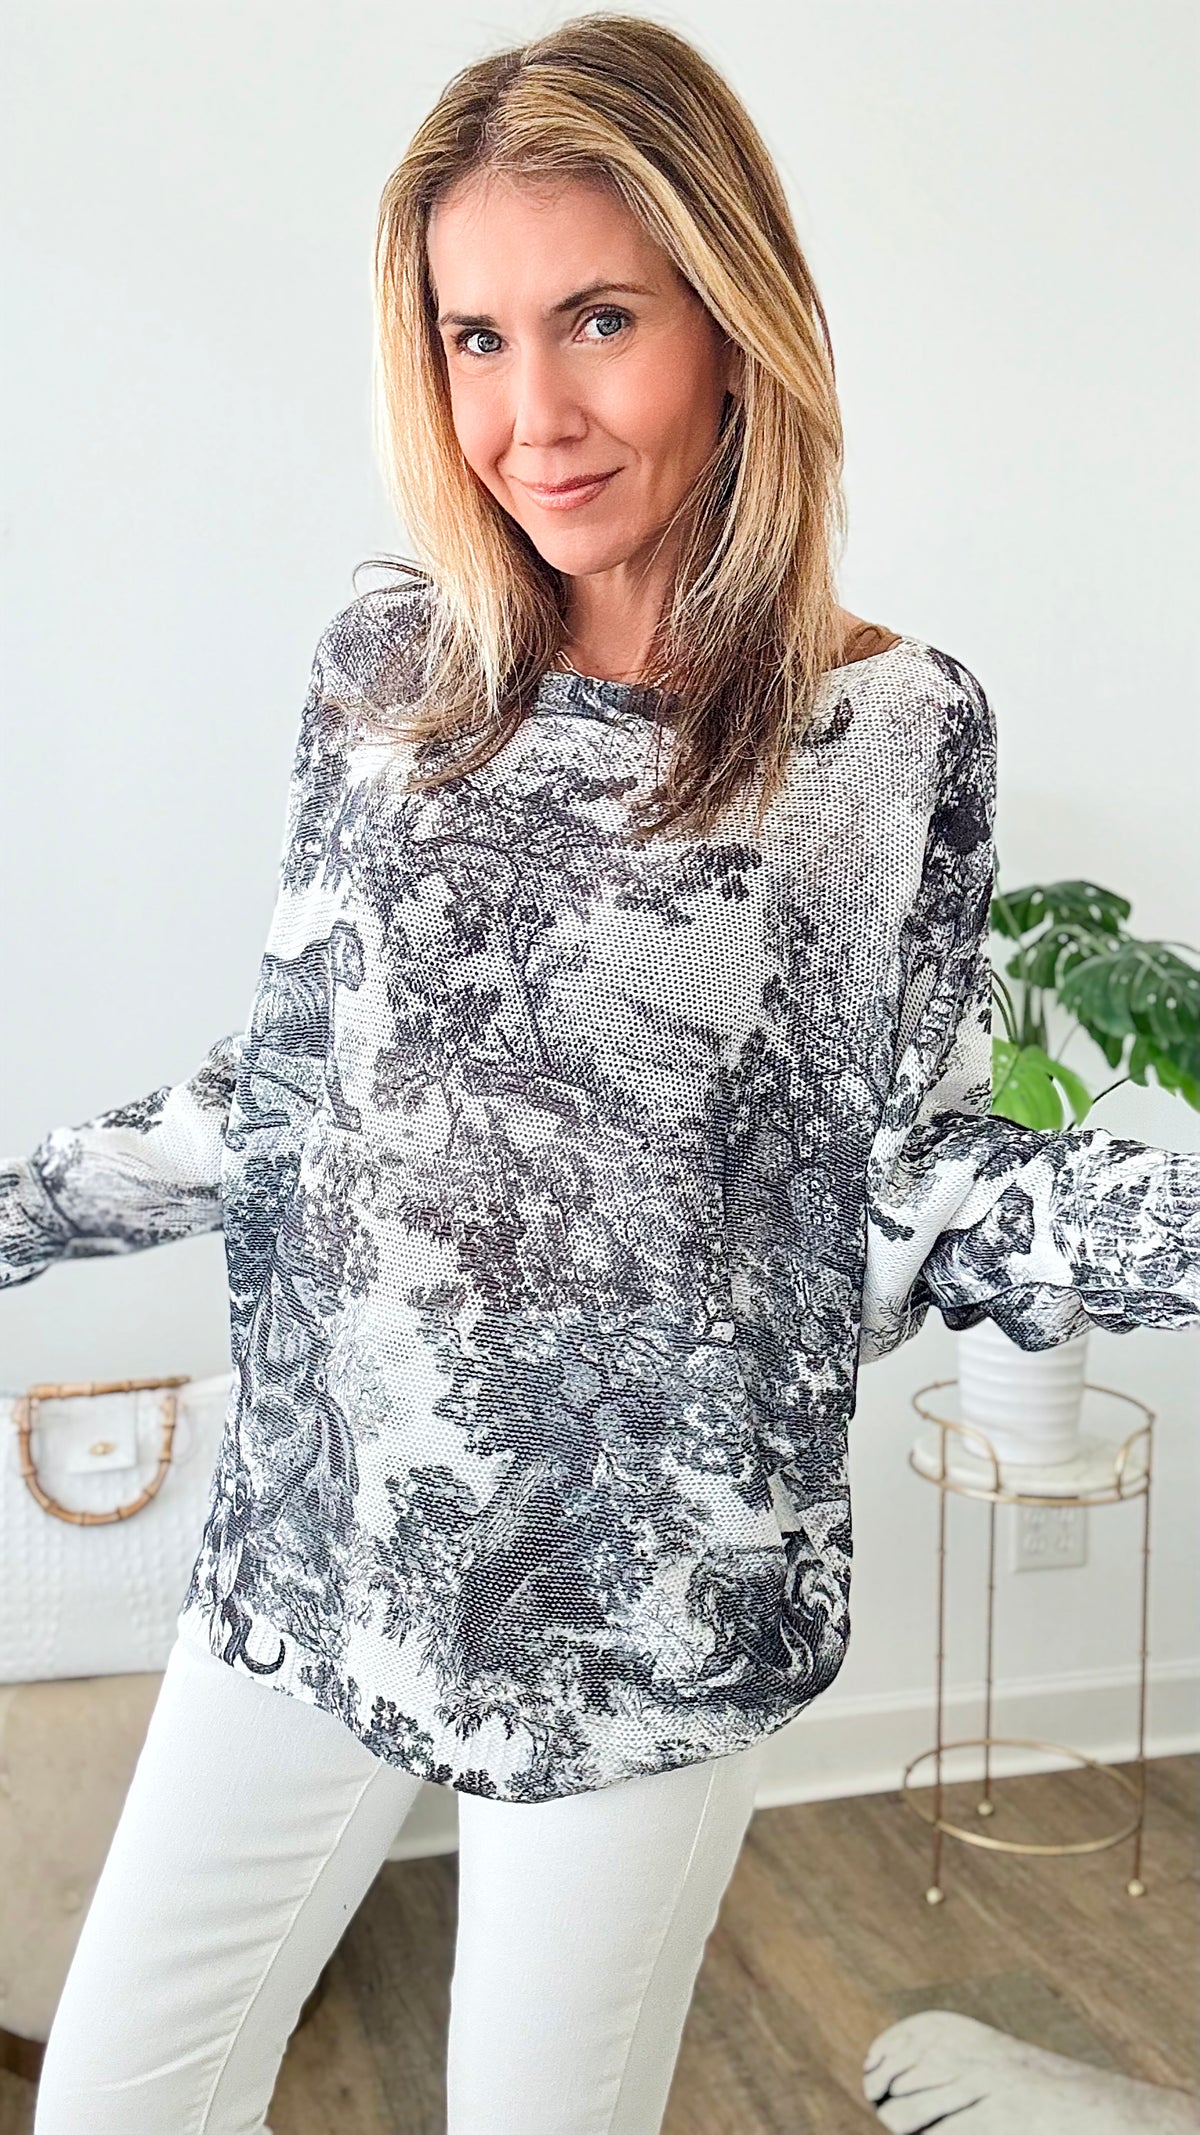 Adorable Toile Italian St Tropez Knit - Black-140 Sweaters-Germany-Coastal Bloom Boutique, find the trendiest versions of the popular styles and looks Located in Indialantic, FL